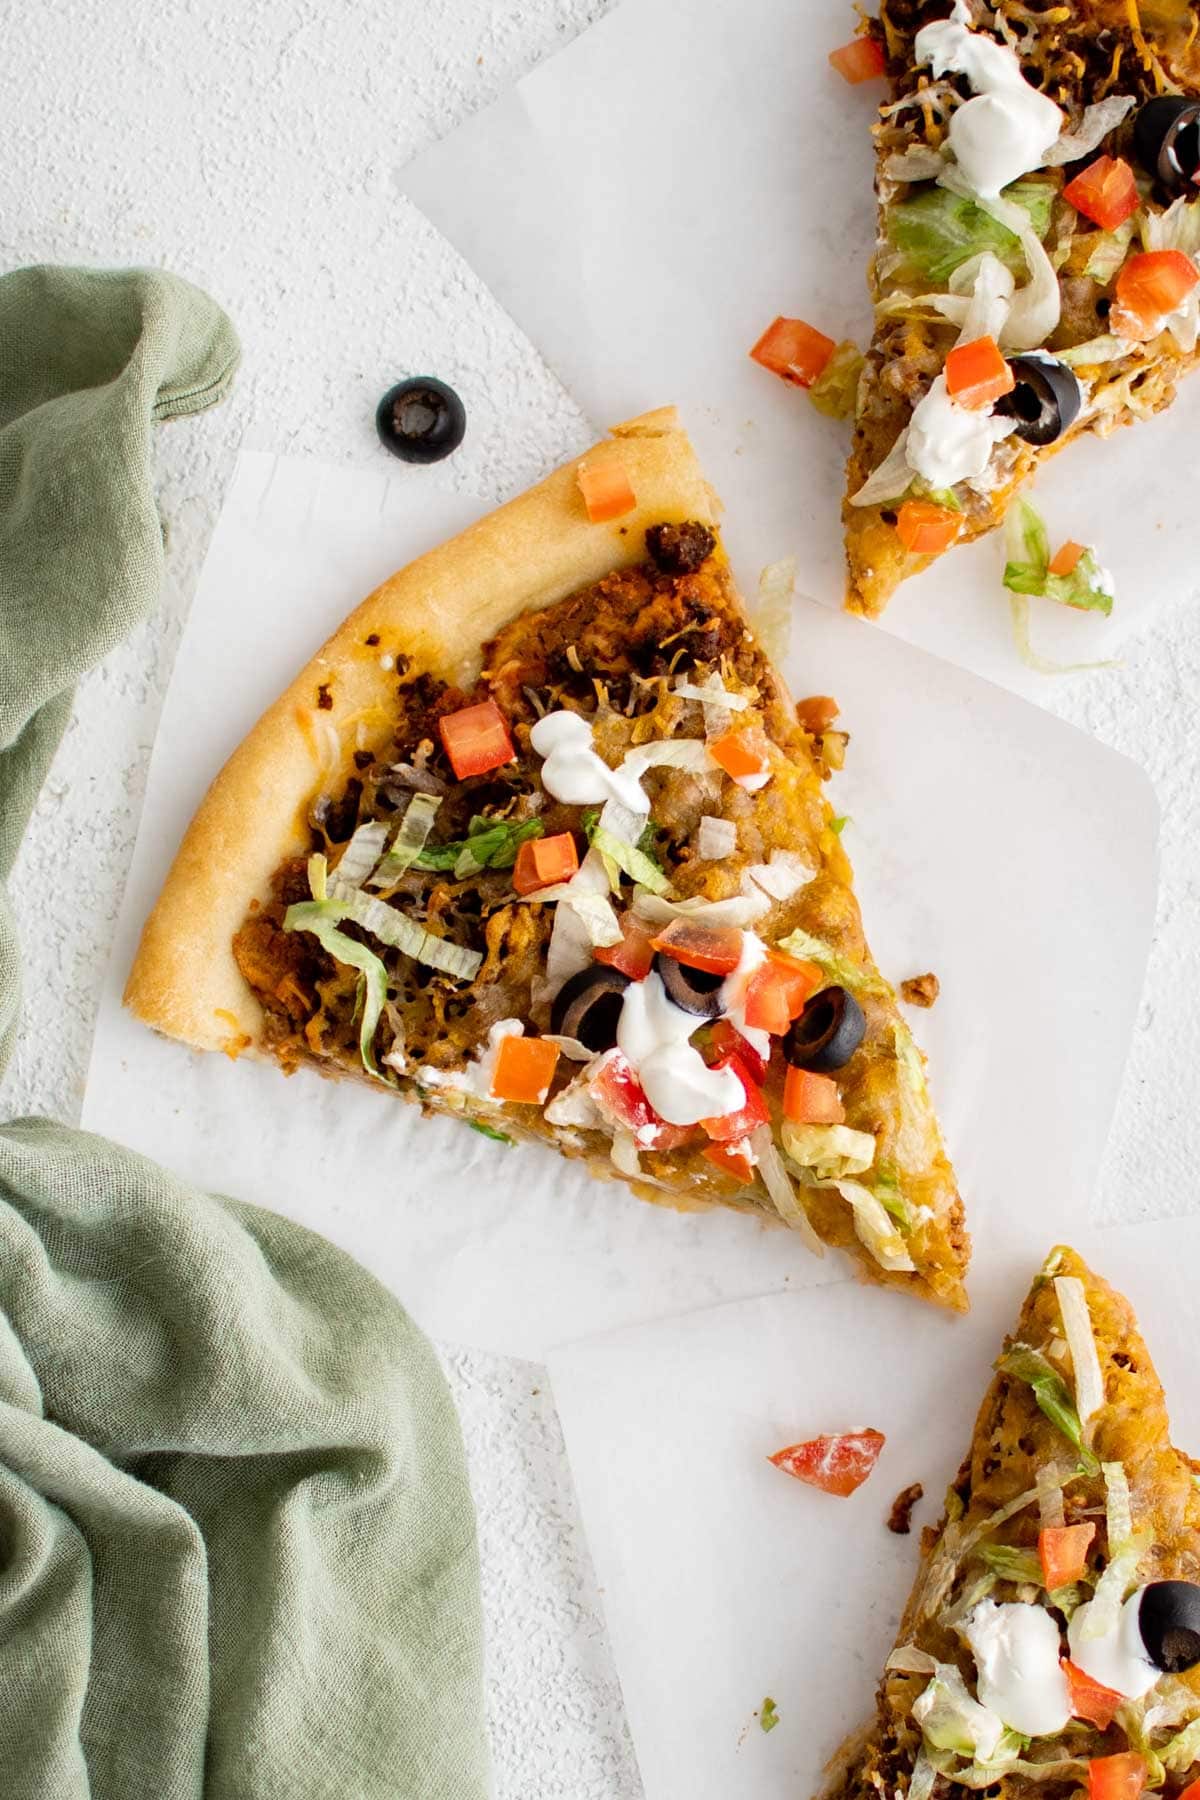 Pizza slice with taco toppings.